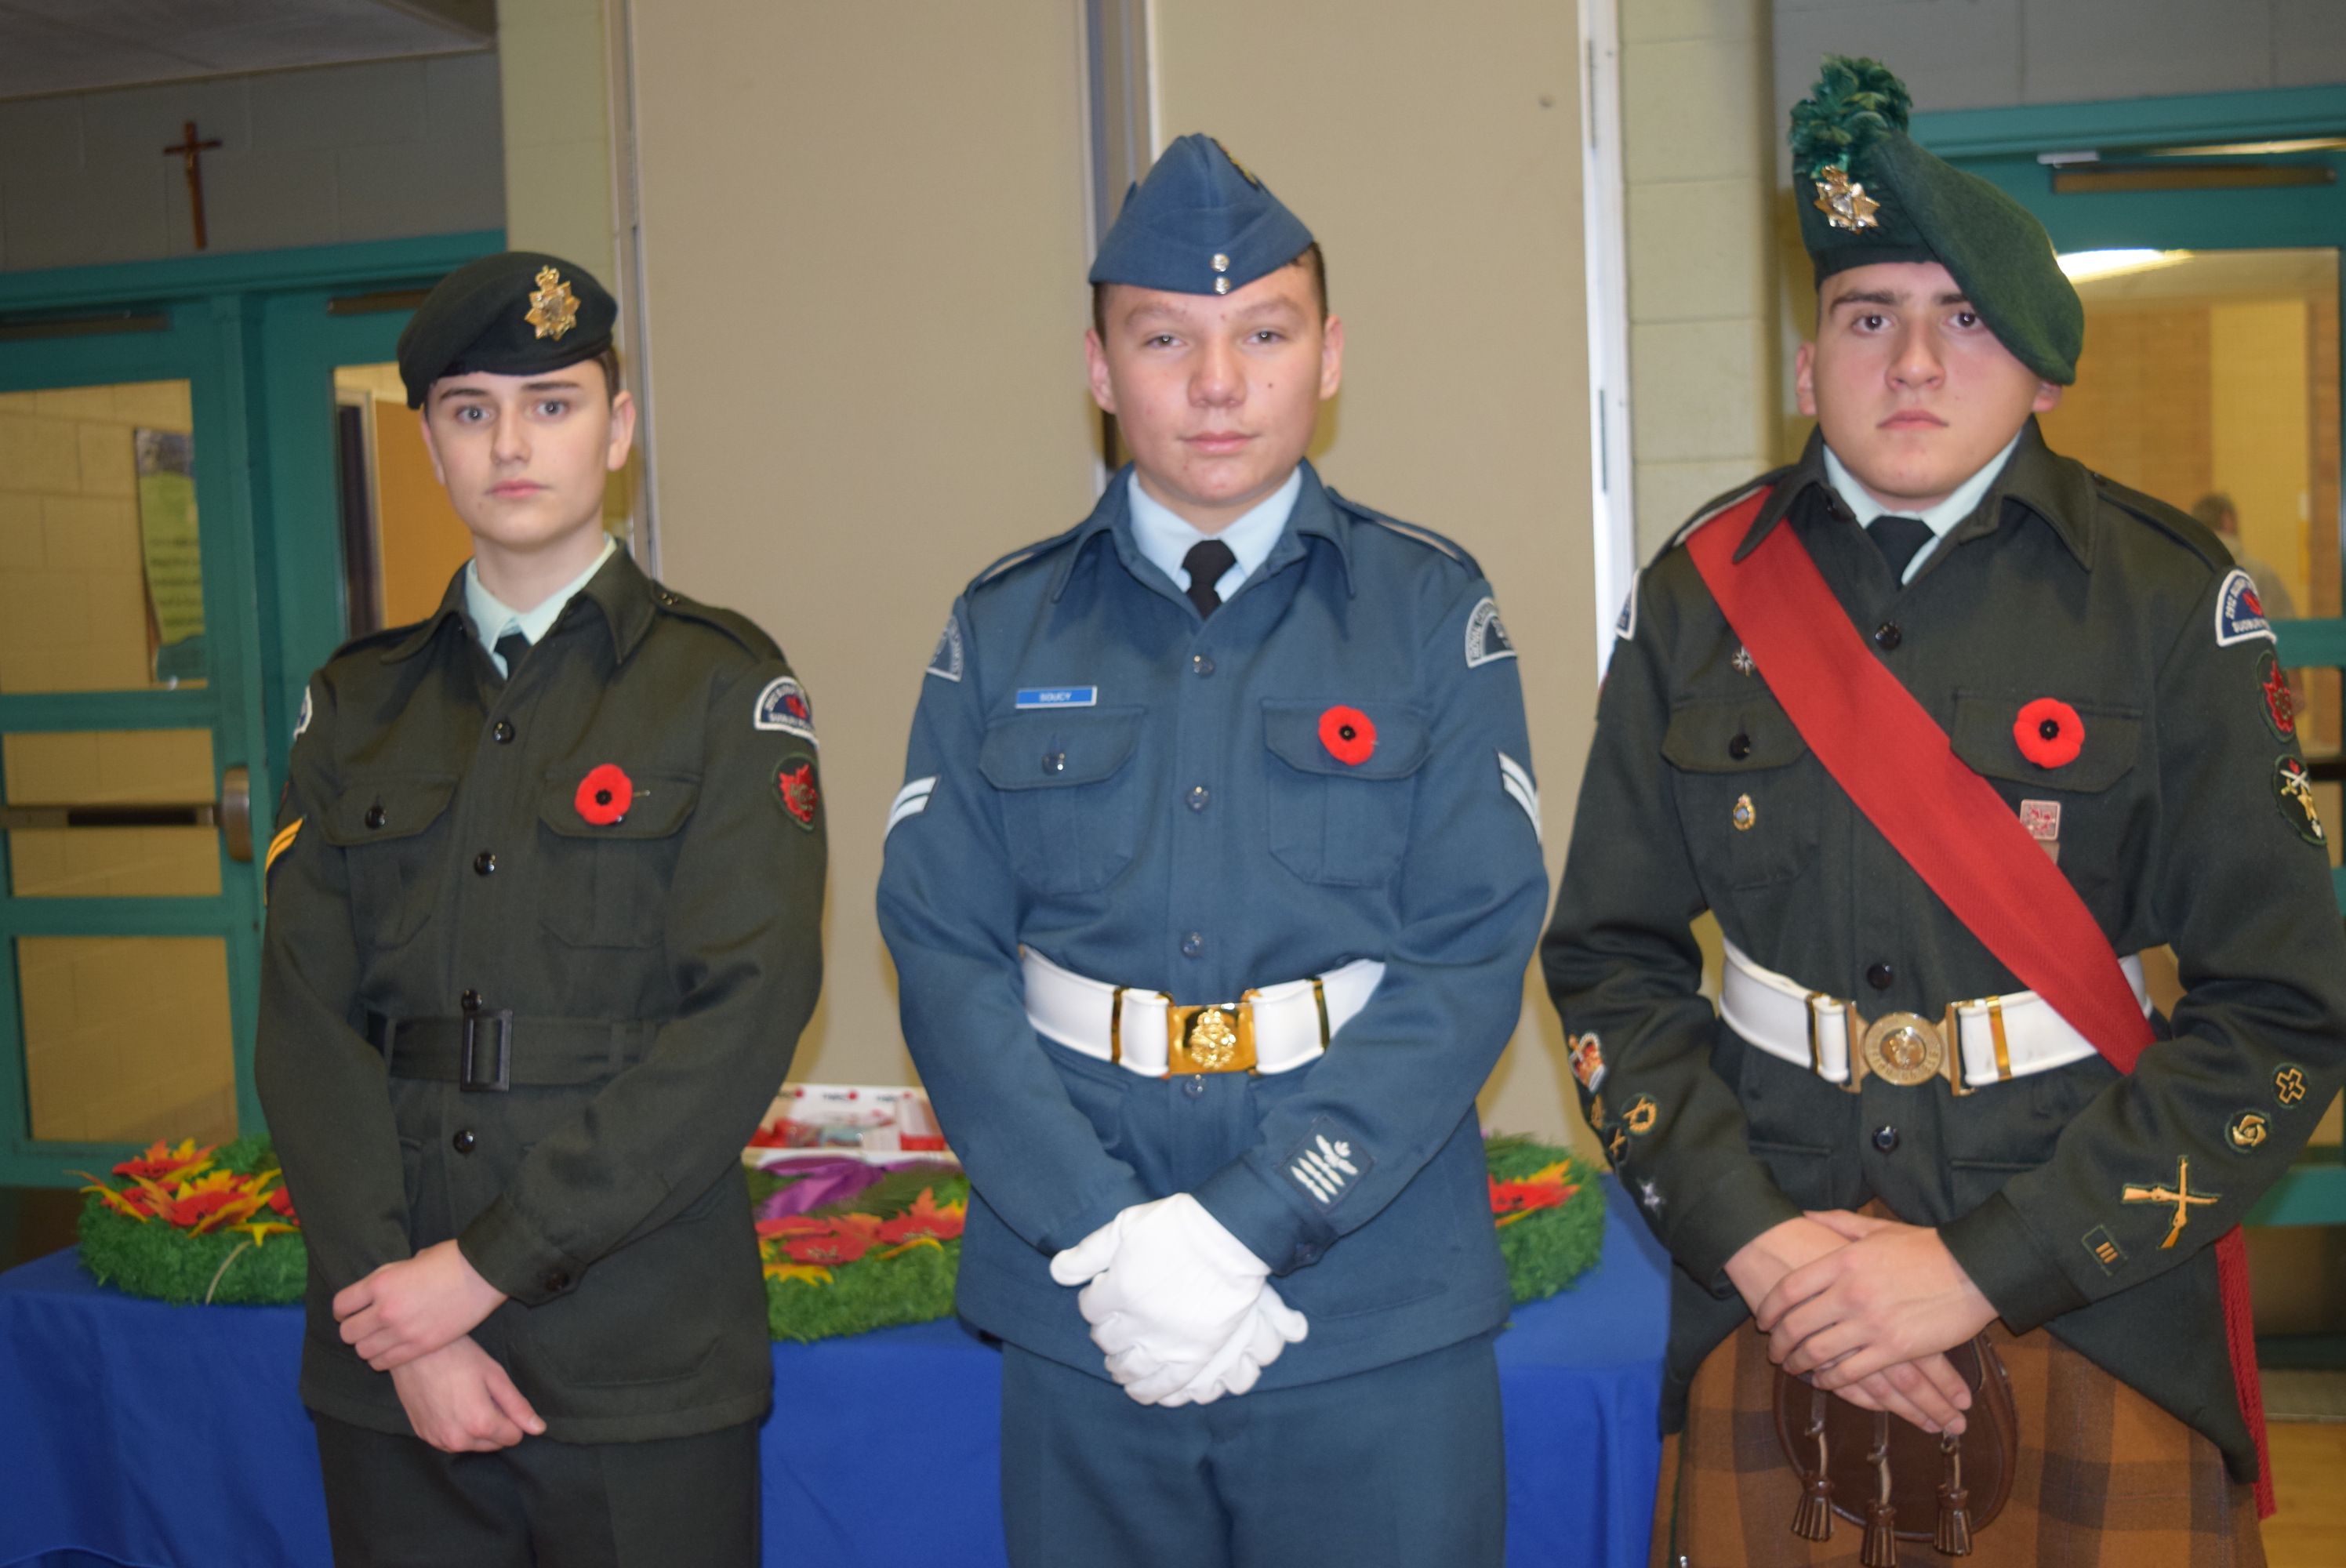 Cadet representatives stand alongside the Remembrance Day wreathes.